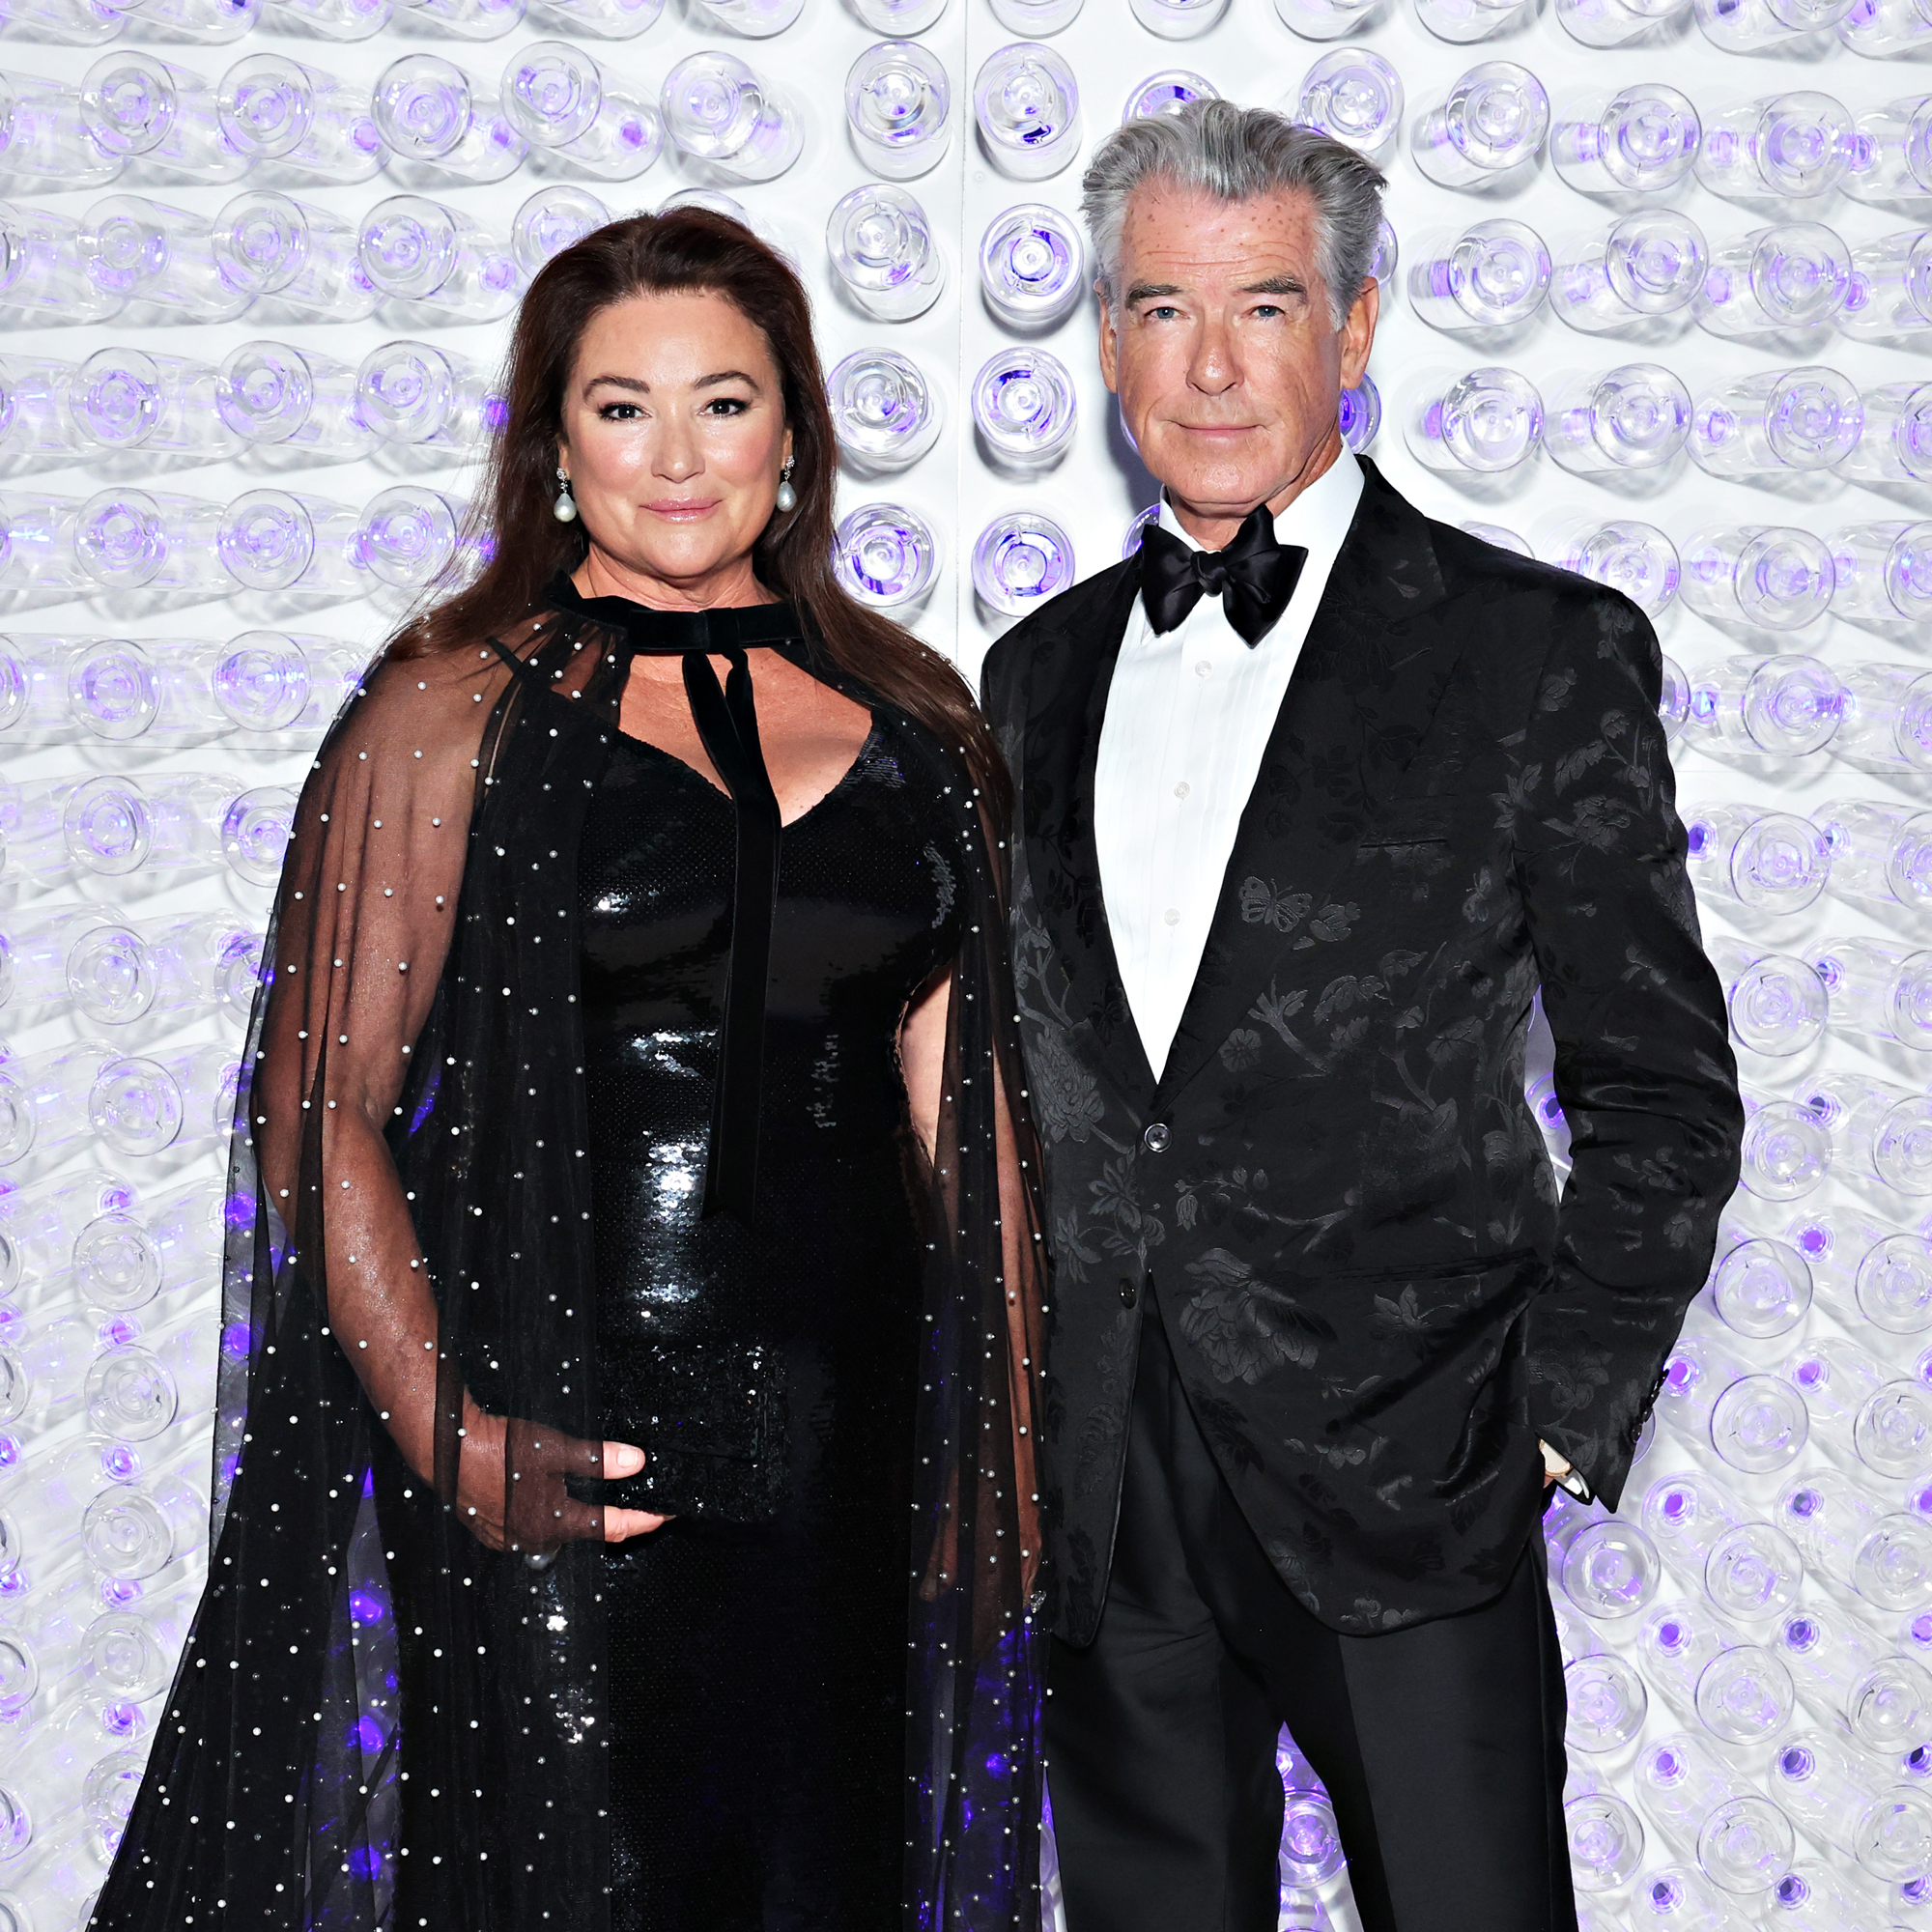 Pierce-Brosnan-Reflects-on-How-Many-Many-Hardships-Strengthened-His-Marriage-to-Wife-Keely-2.jpg